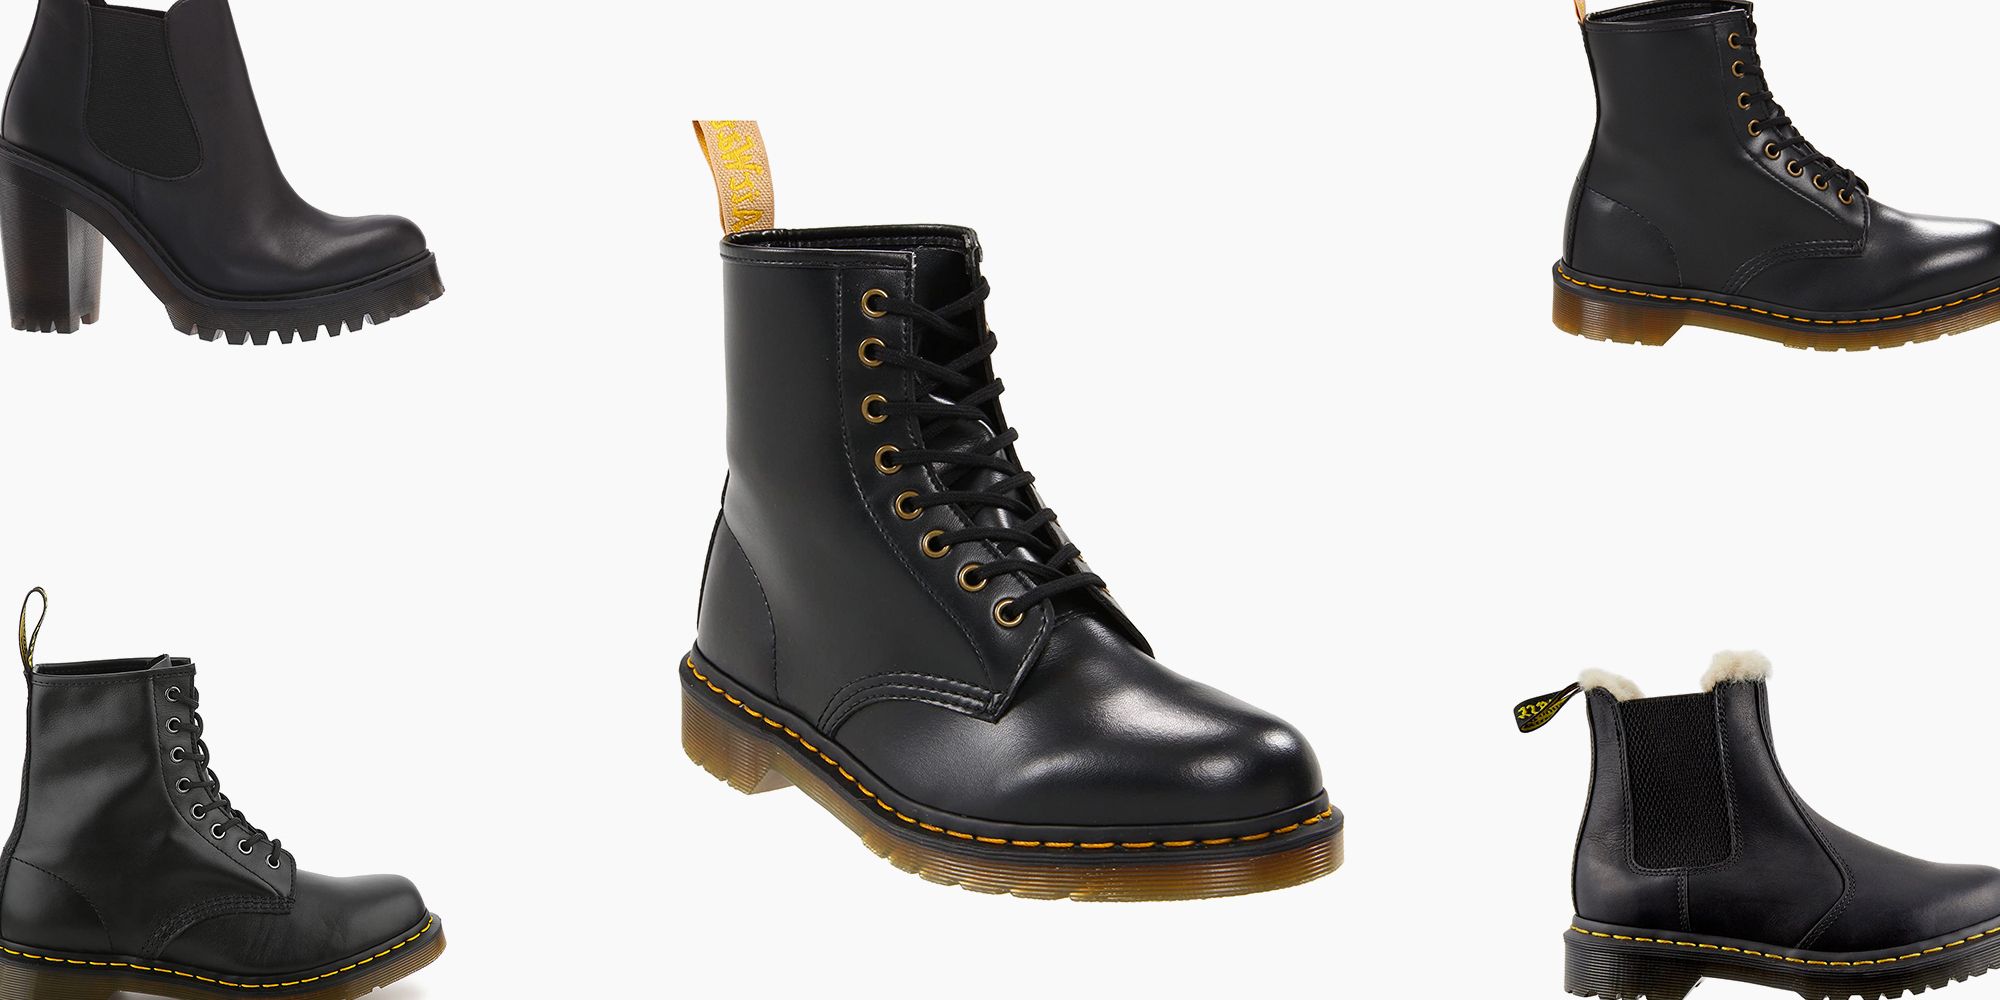 who sells doc marten boots near me